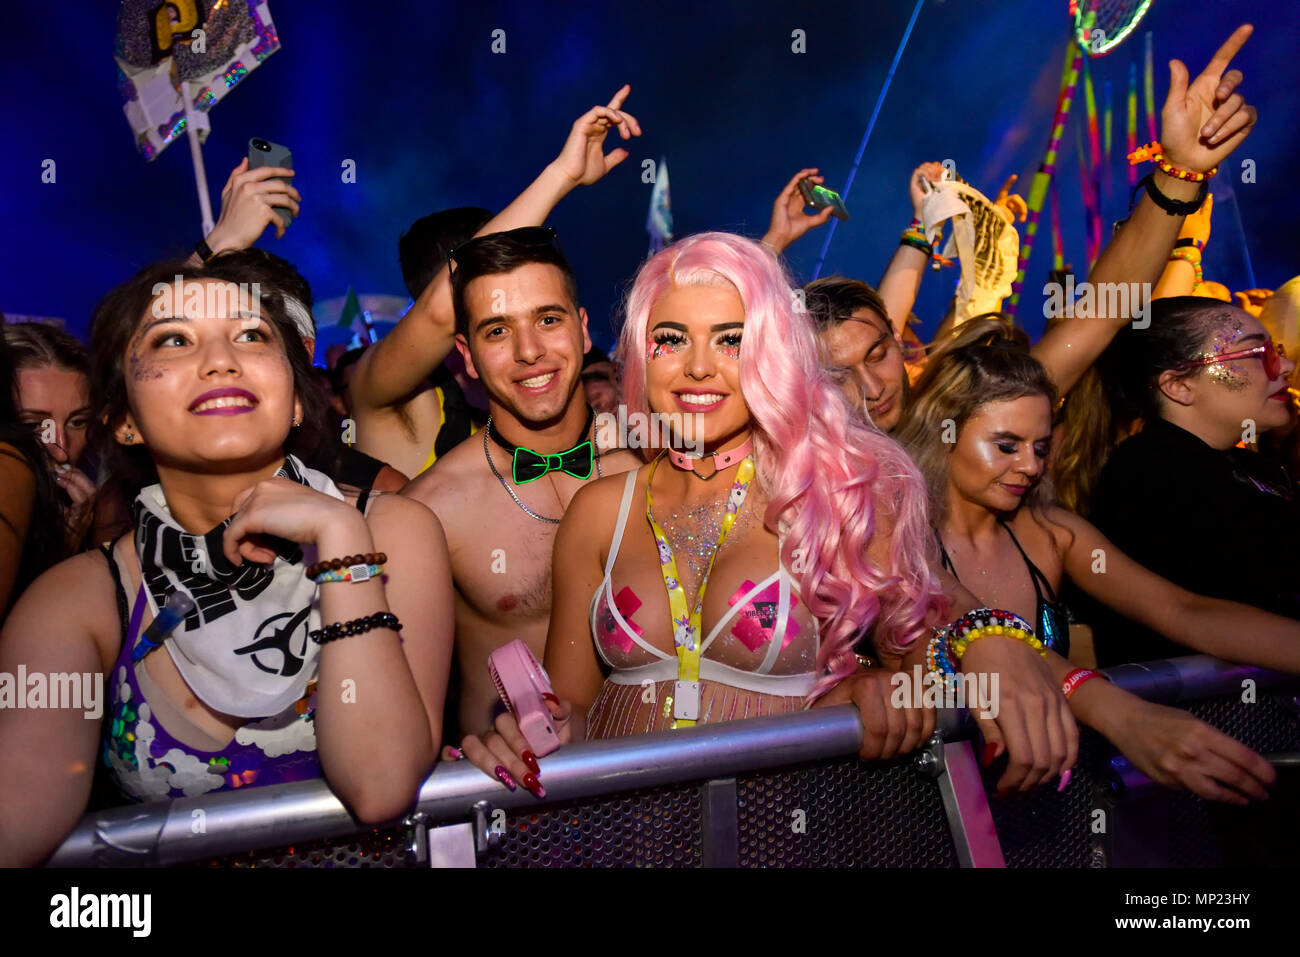 Las Vegas, Nevada, May 20, 2018, Electric Daisy Carnival, edc festival, Day  2, Credit: Ken Howard Images/Alamy Live News Stock Photo - Alamy